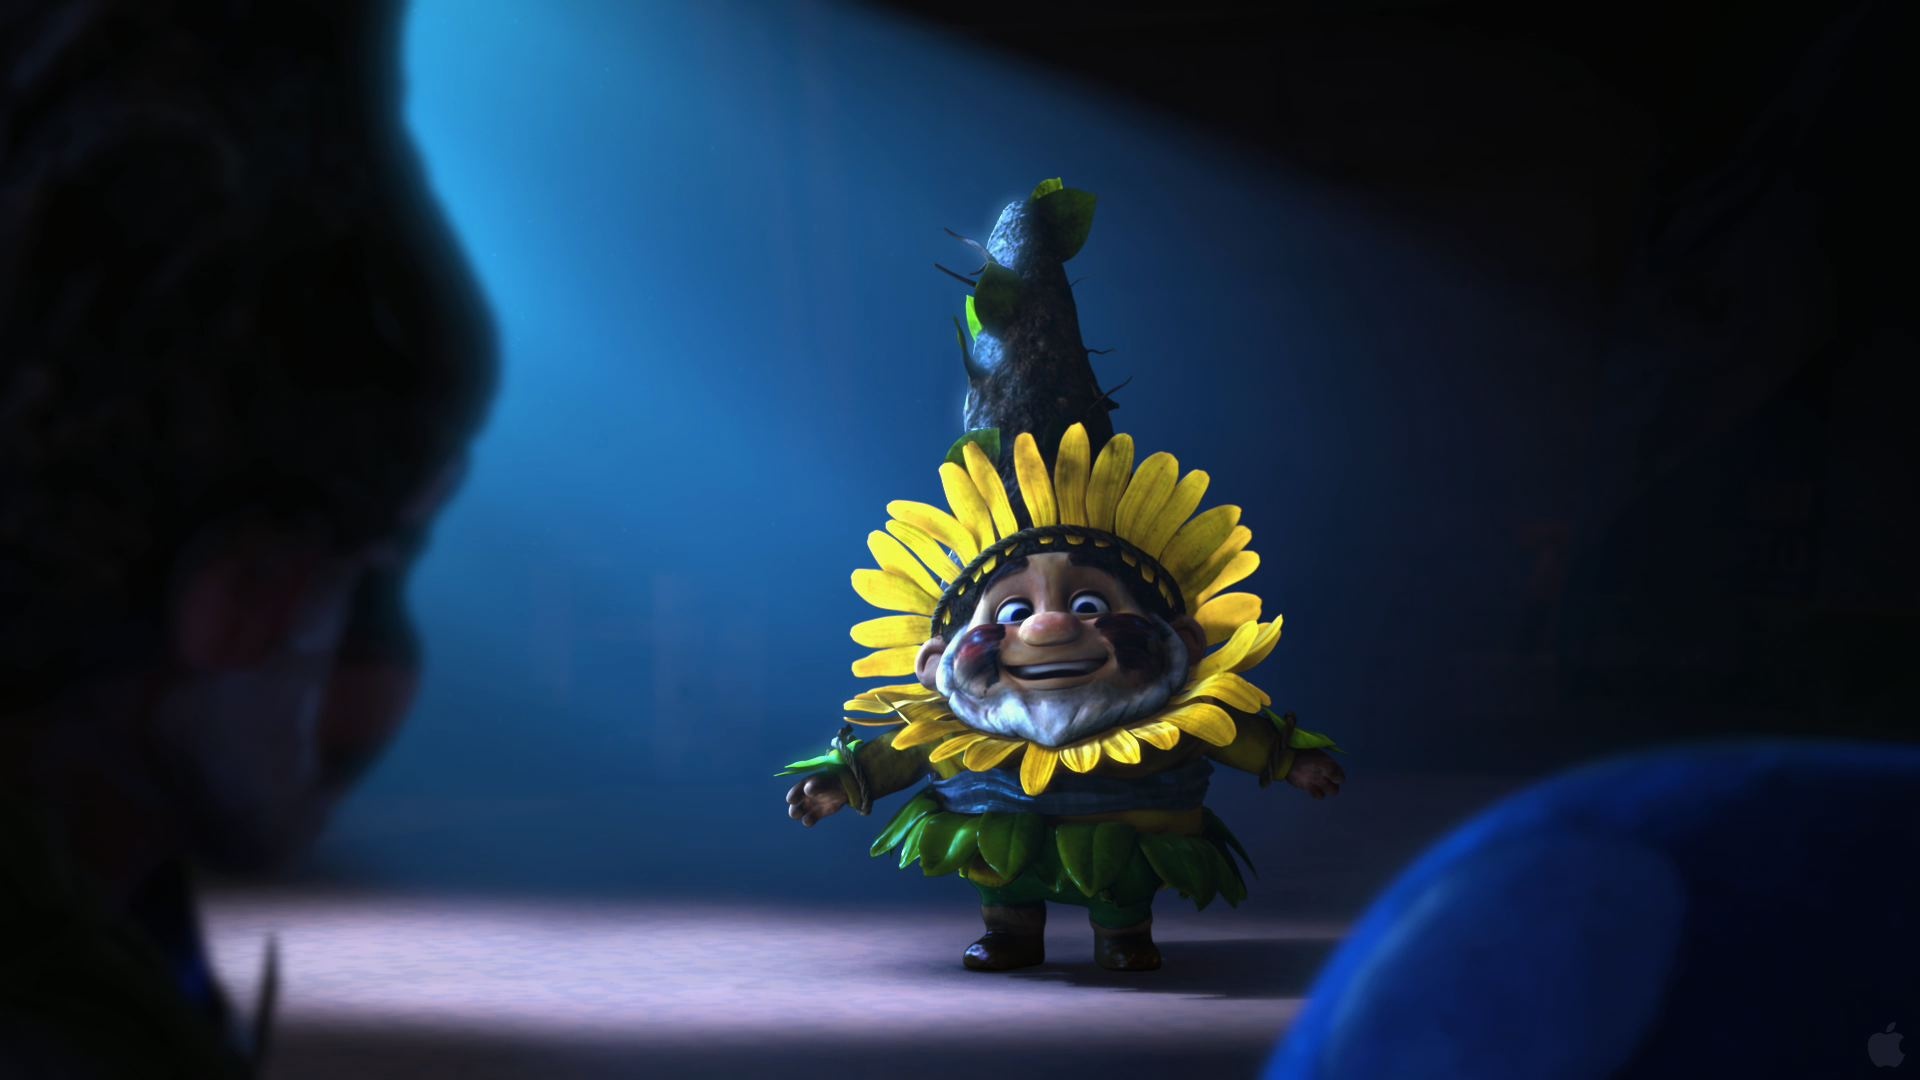 Benny the blue gnome, Gnomeo and Juliet, 1920x1080 Full HD Desktop